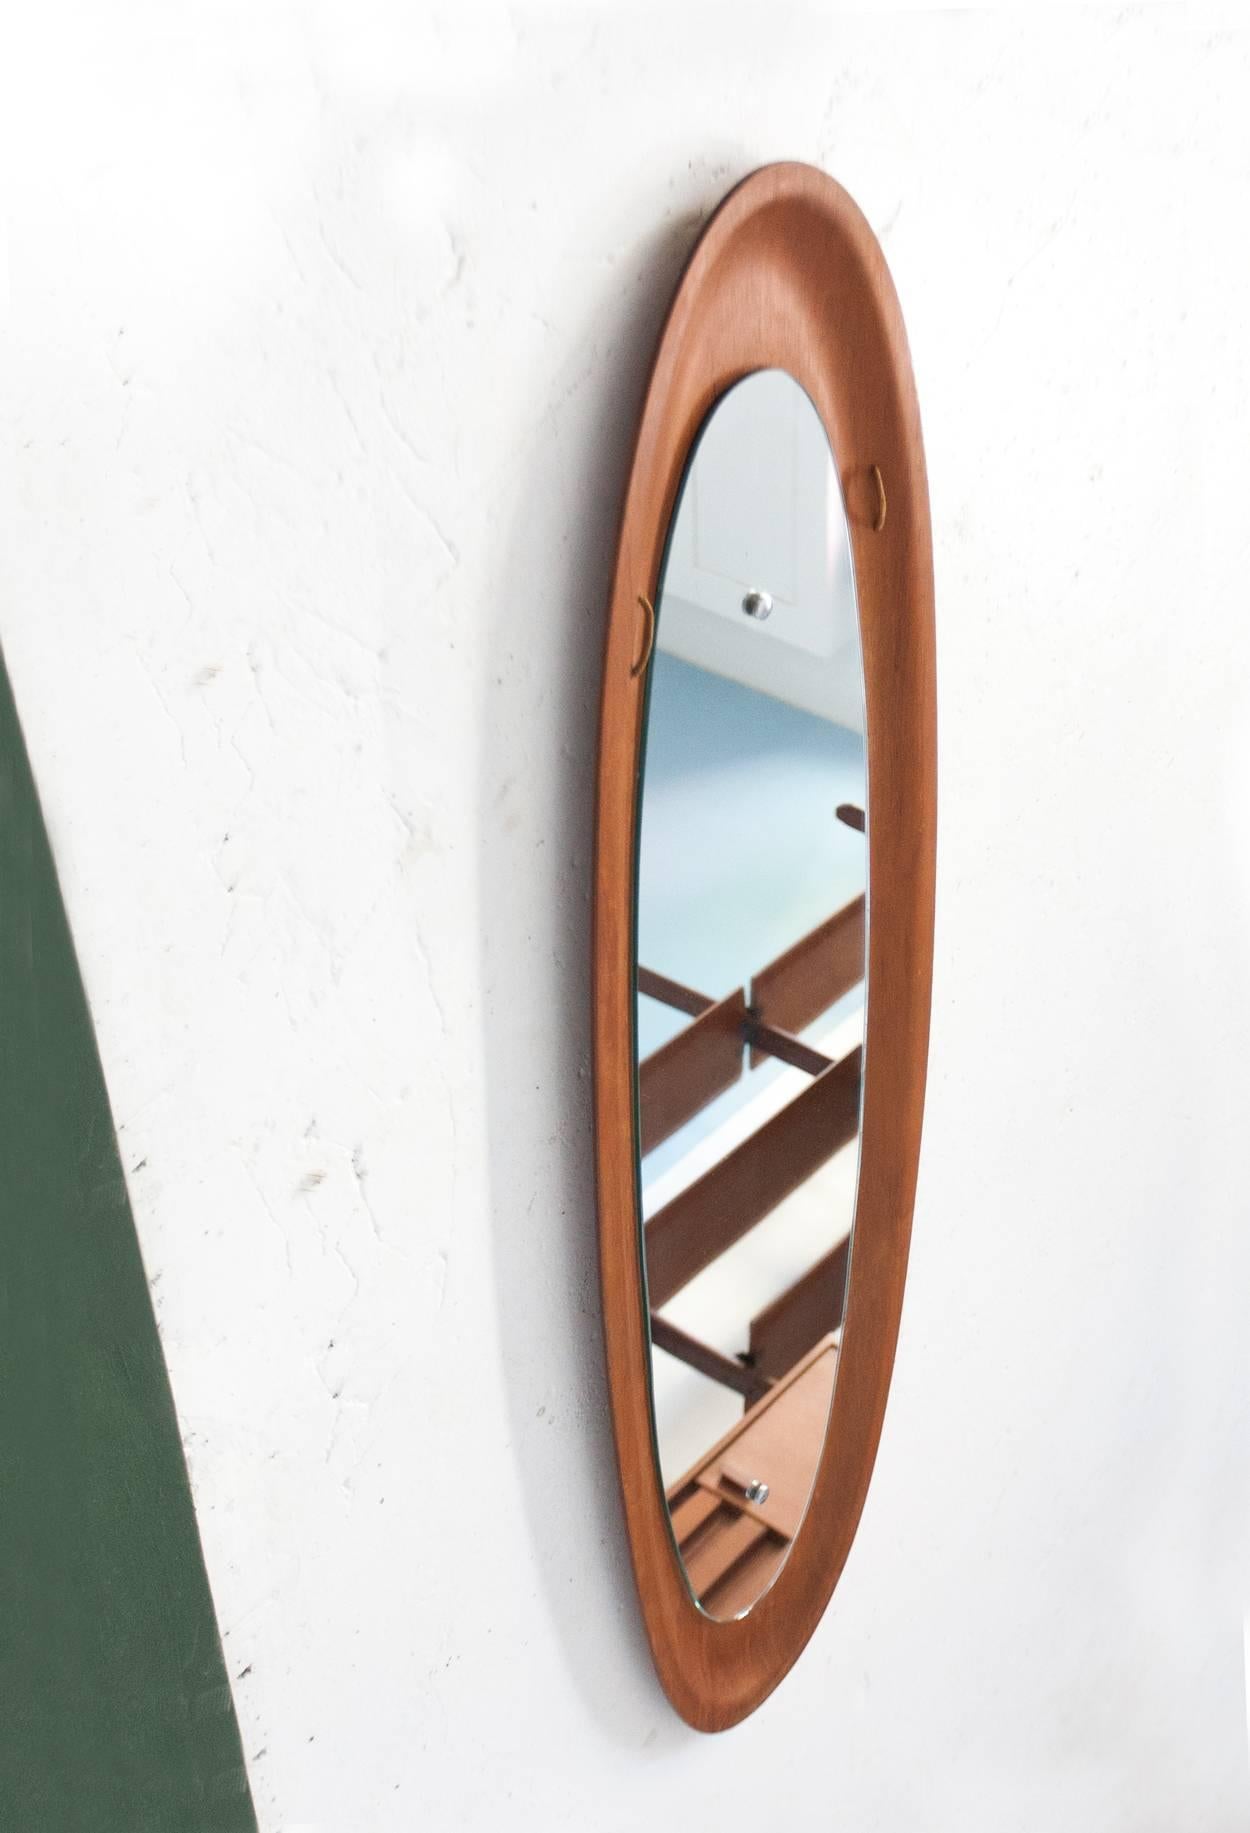 This Mid-Century teak mirror was produced in Italy in the 1950s.